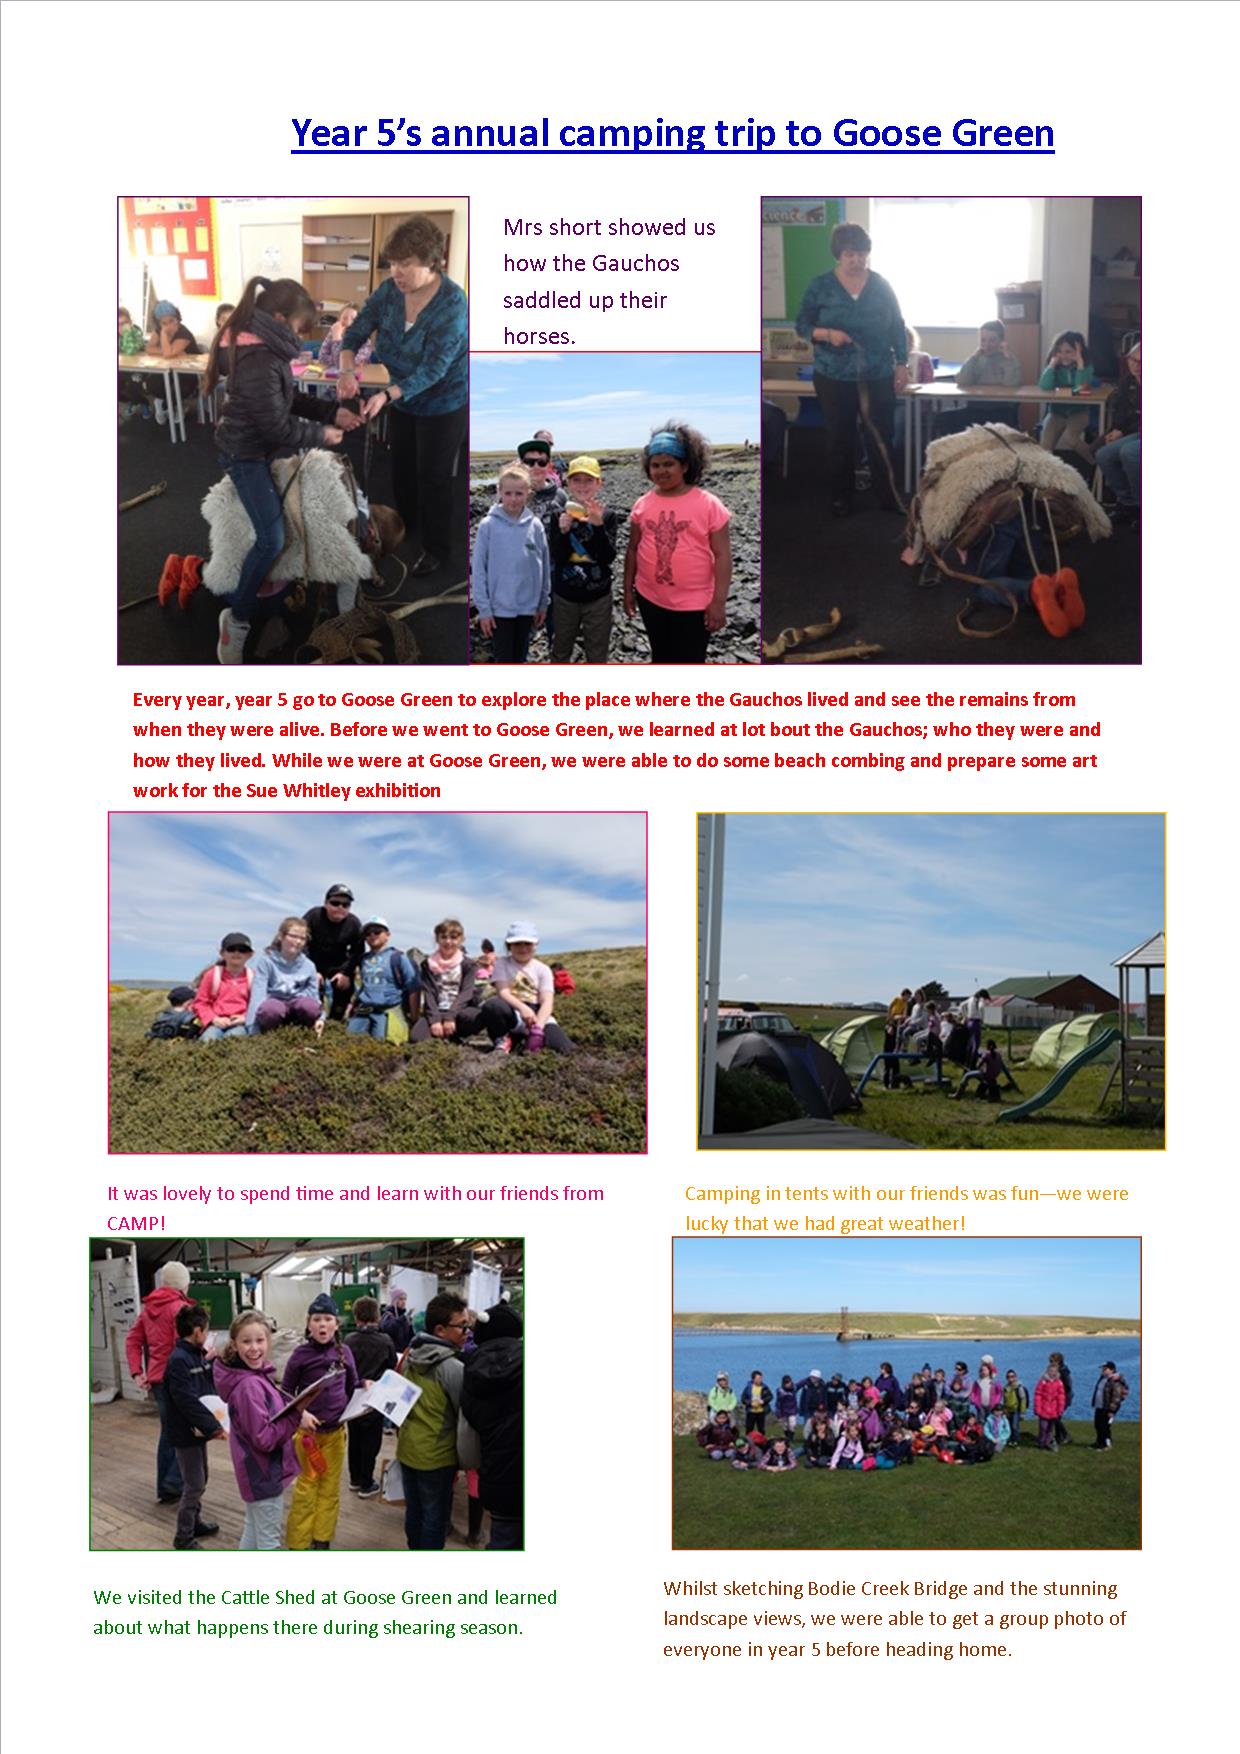 Year 5s Trip to Goose Green